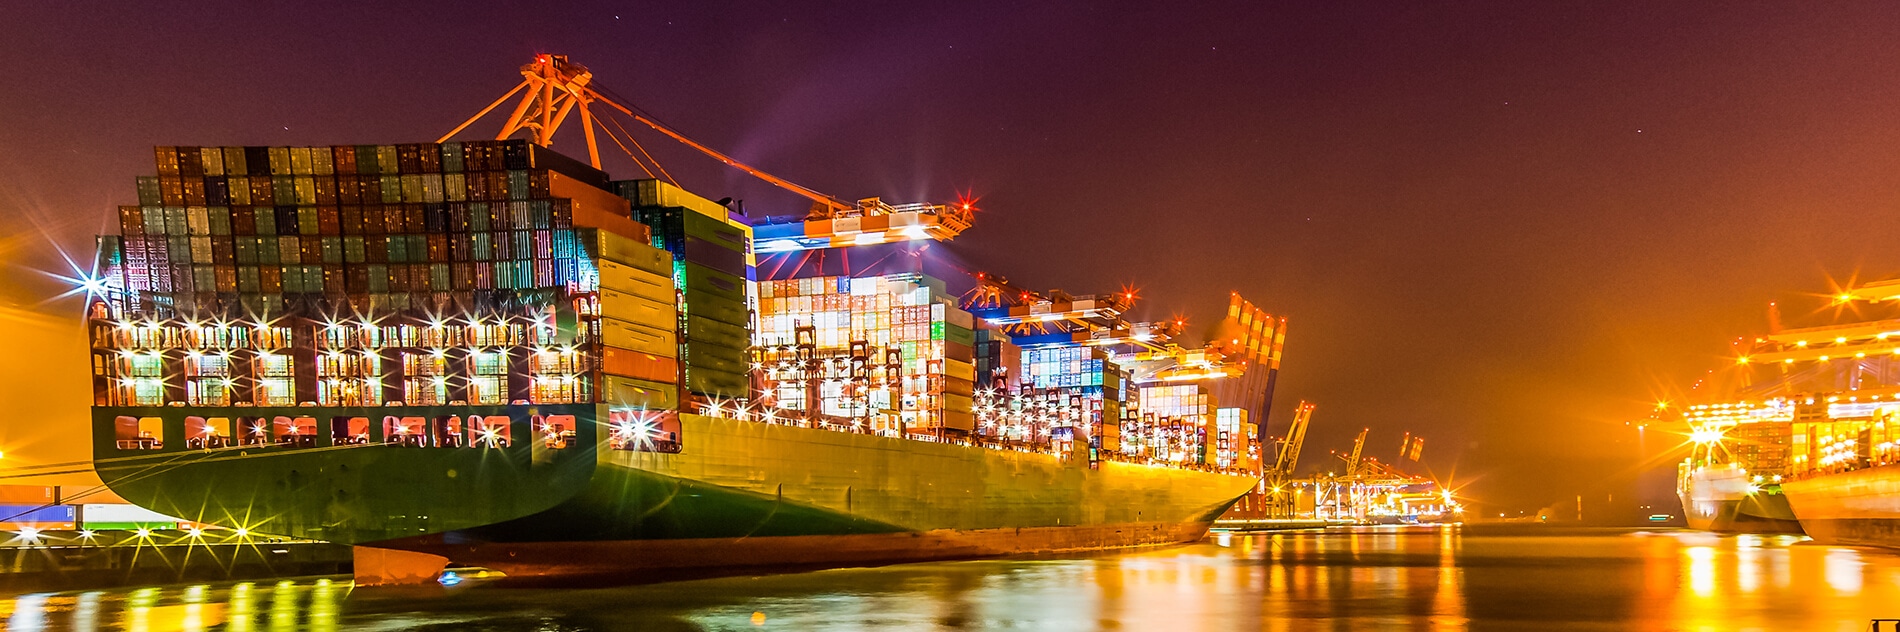 A huge international cargo ship anchored at port during a night time loading session